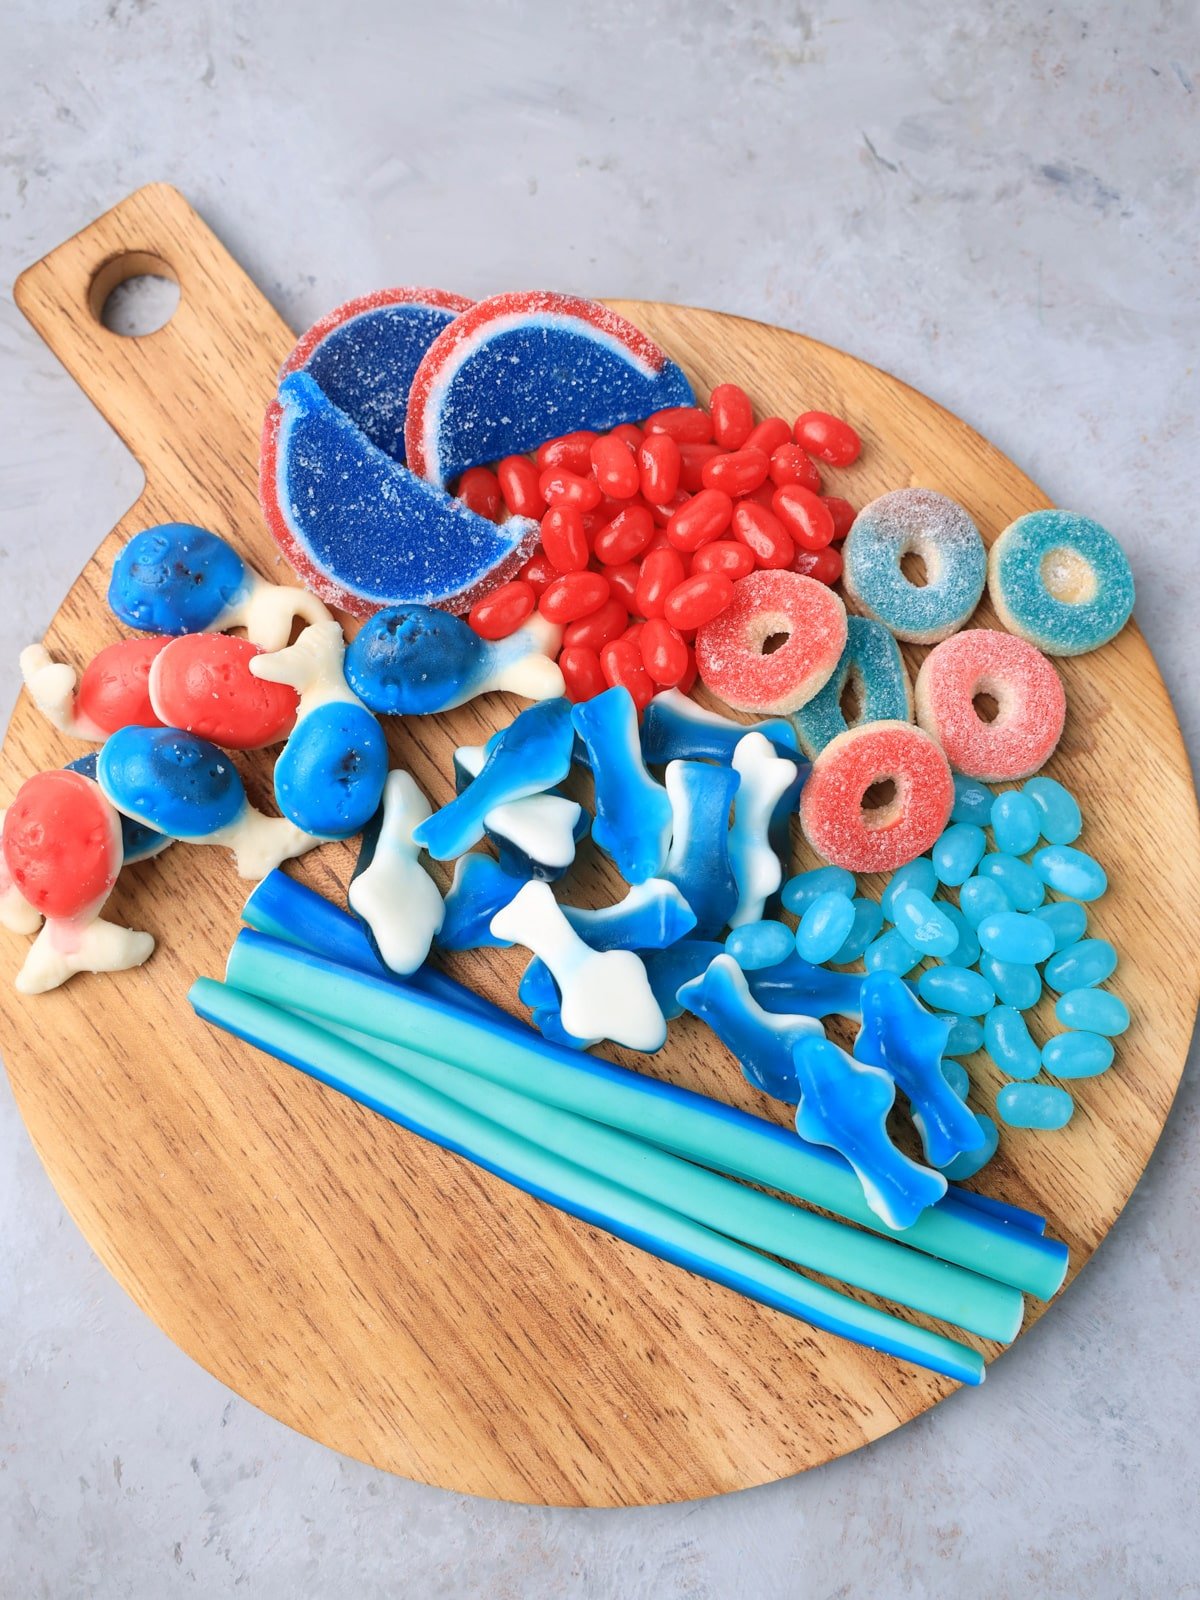 4th of july candy on a wooden cutting board.